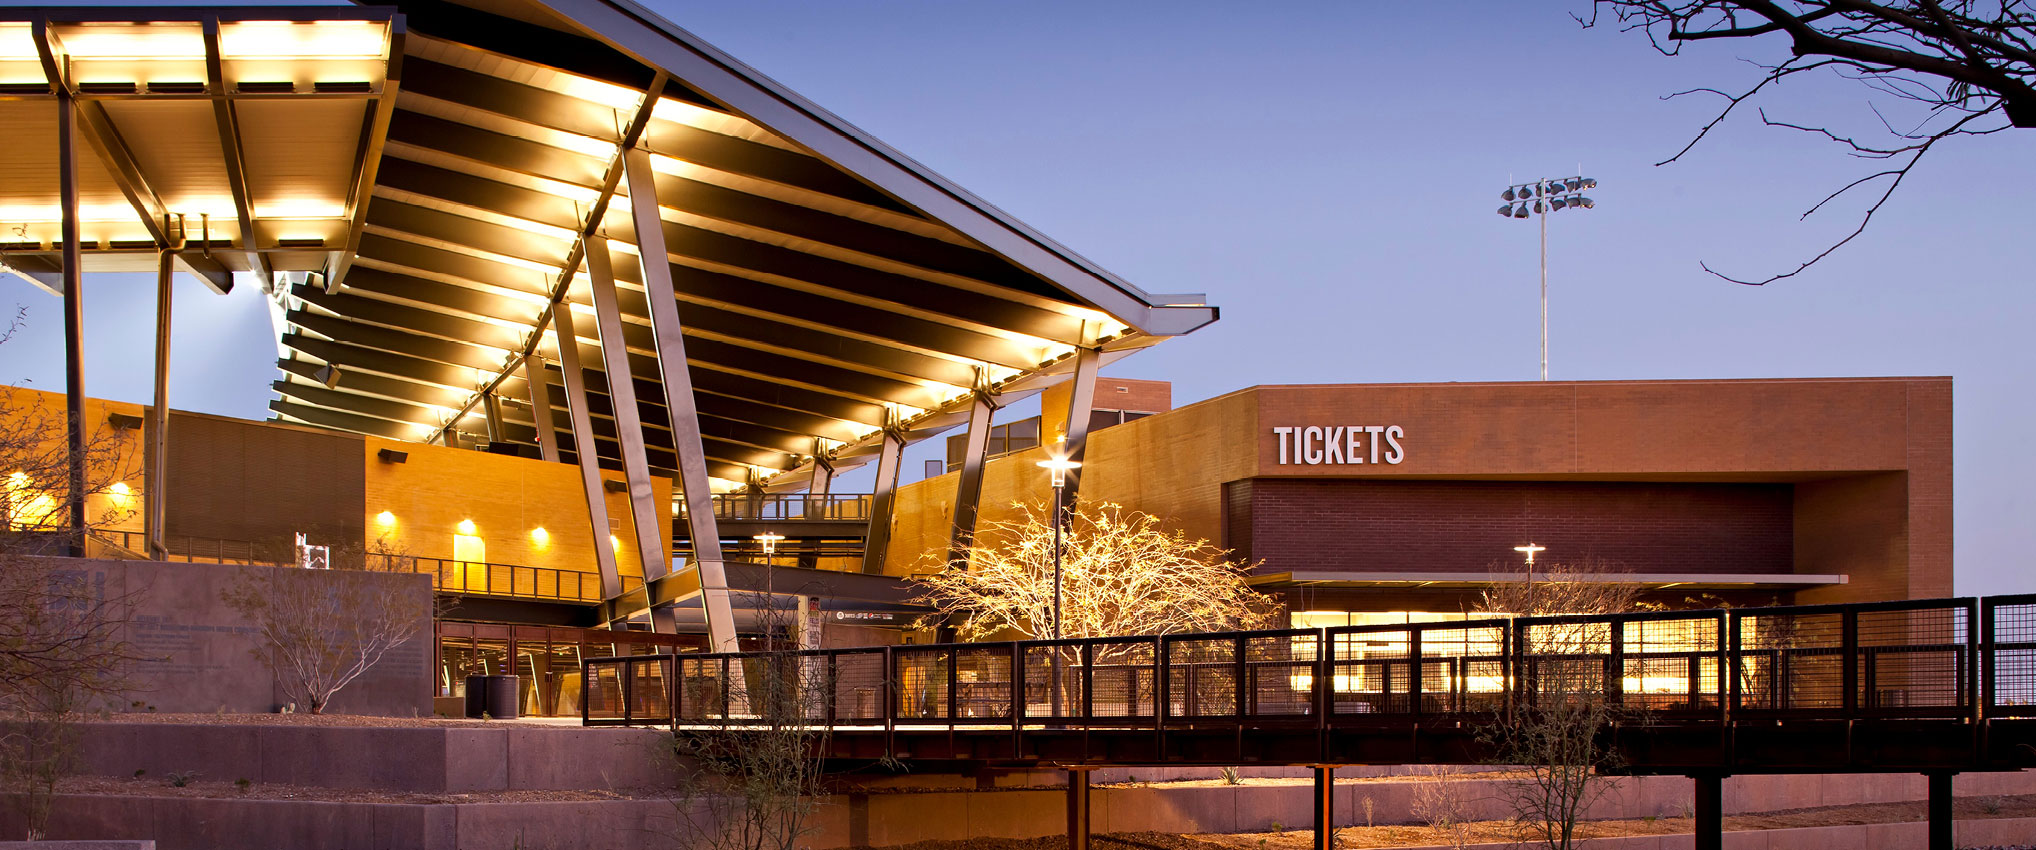 USA Today Says HKS-Designed Salt River Fields at Talking Stick Baseball Stadium in Scottsdale Is 1 of 25 Must-See Buildings in Arizona